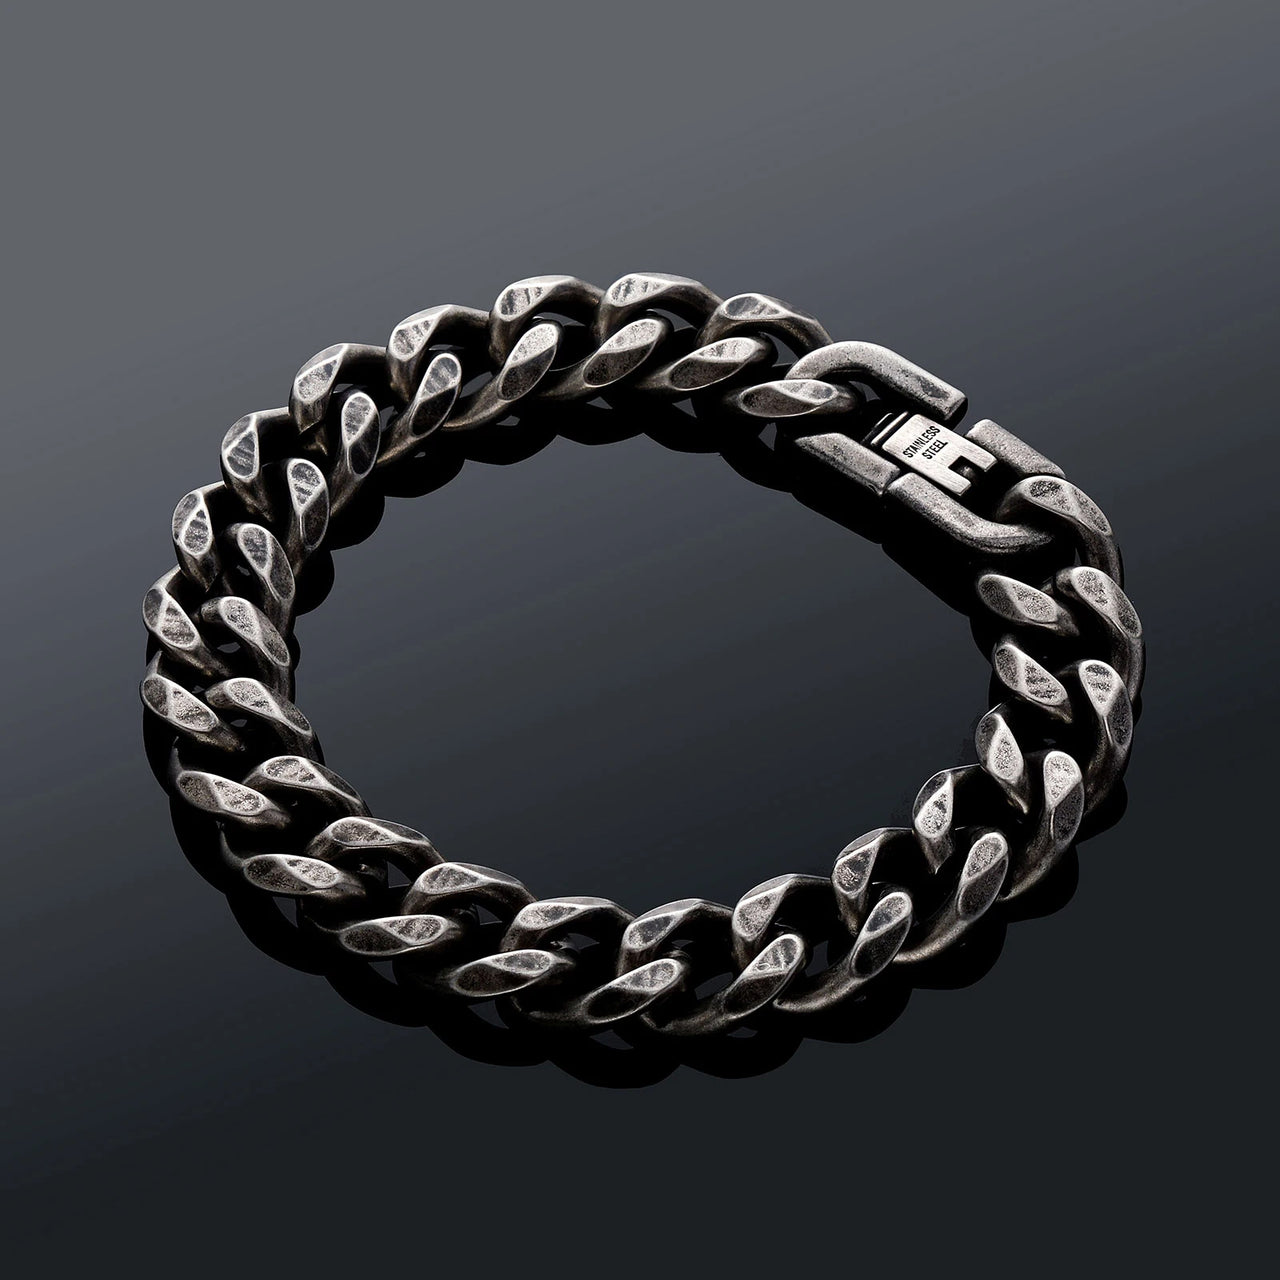 11mm Distressed Brushed Miami Cuban Link Bracelet - Different Drips